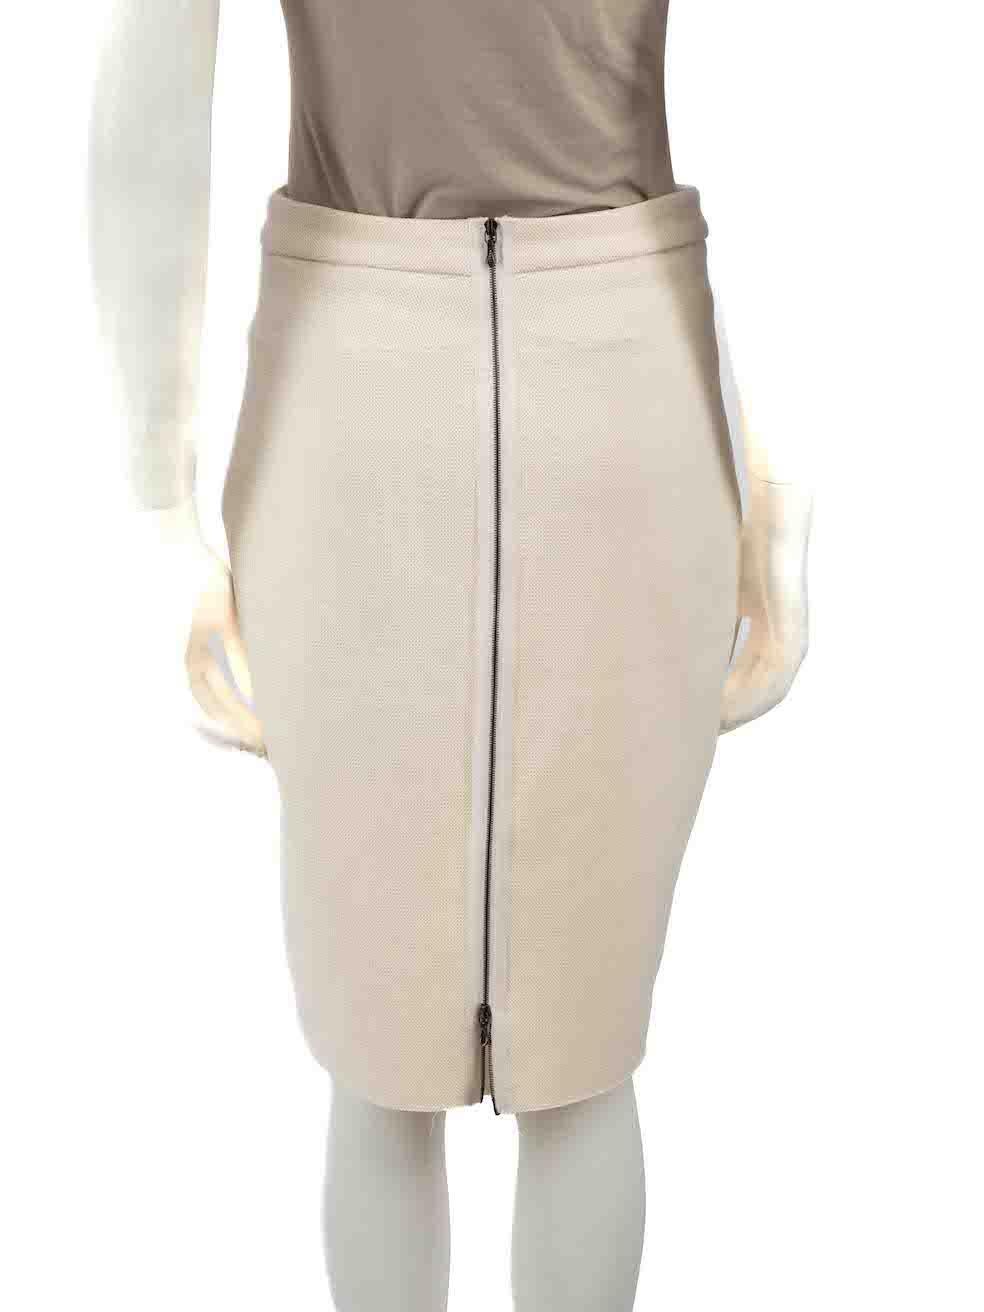 Lanvin Cream Back Zipped Pencil Skirt Size M In Good Condition For Sale In London, GB